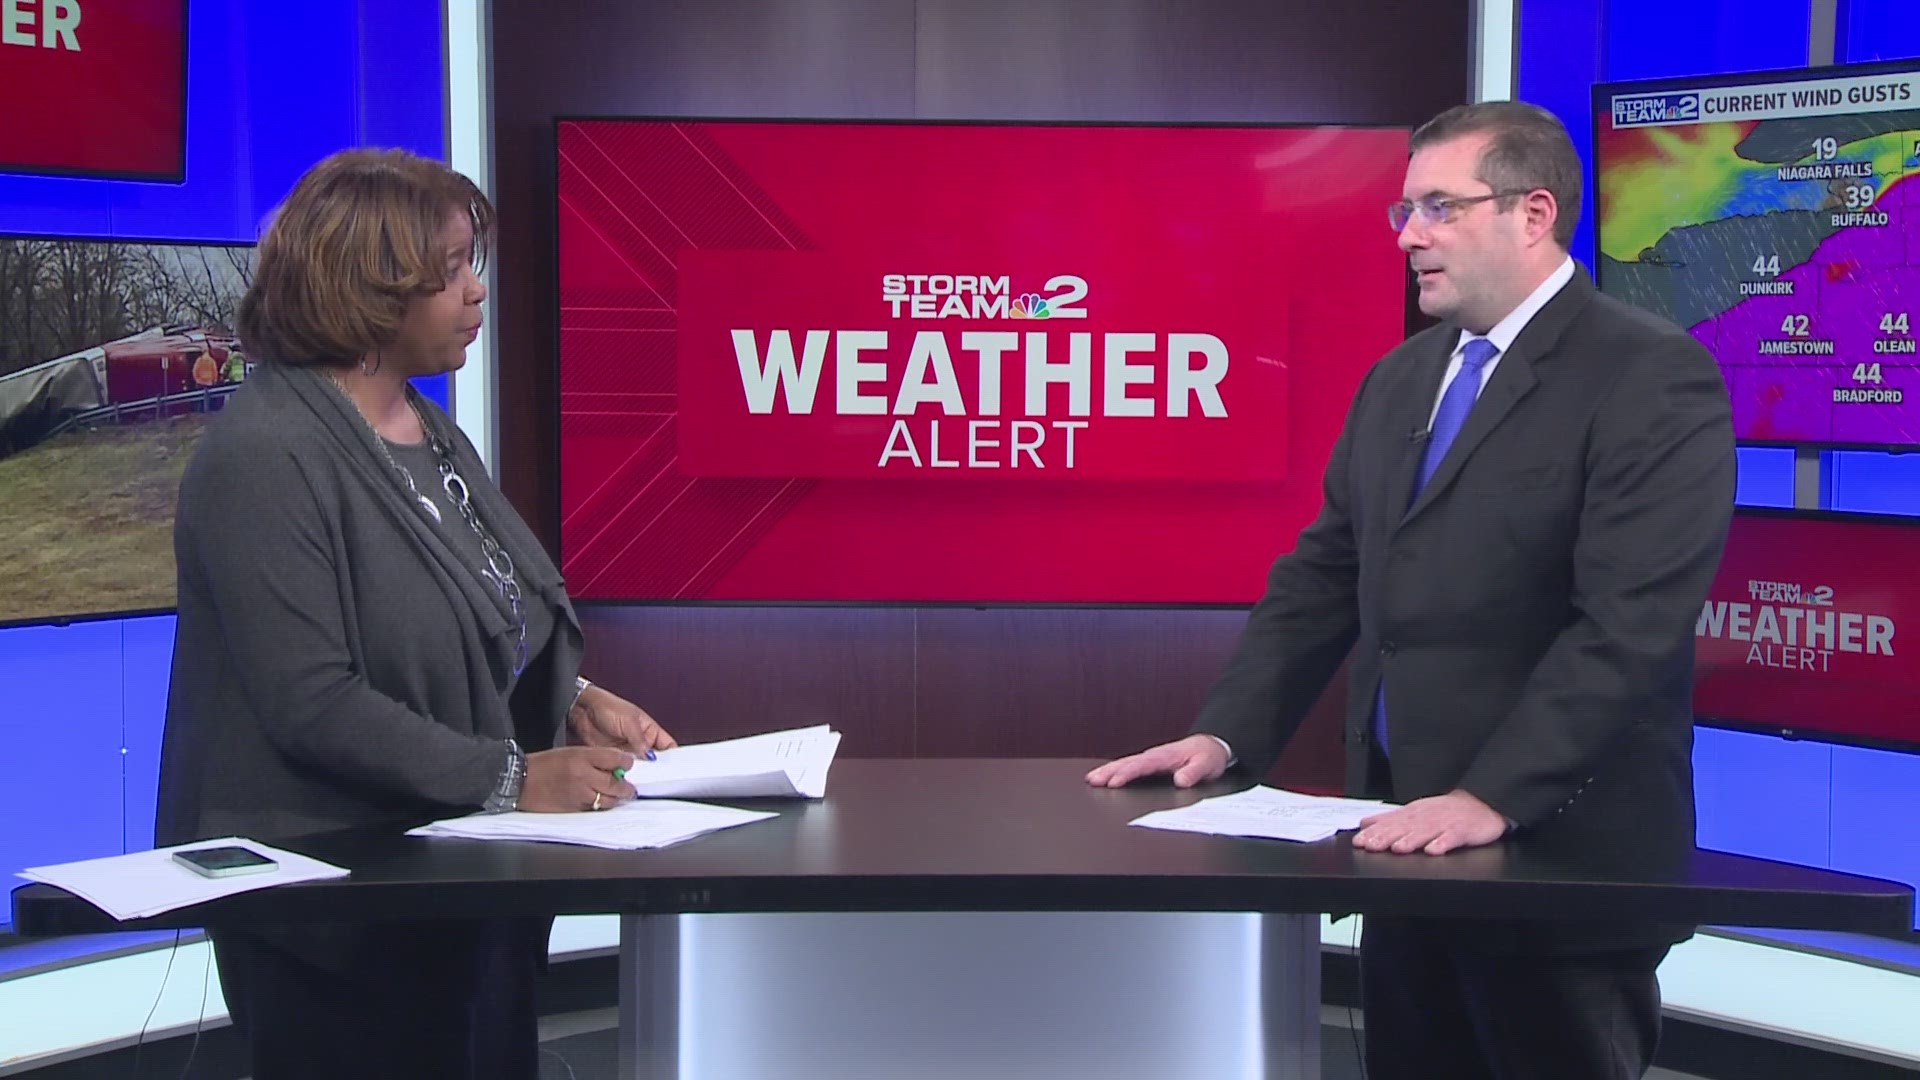 David Bertola is National Grid spokesman and joined the 530 show to talk about outages